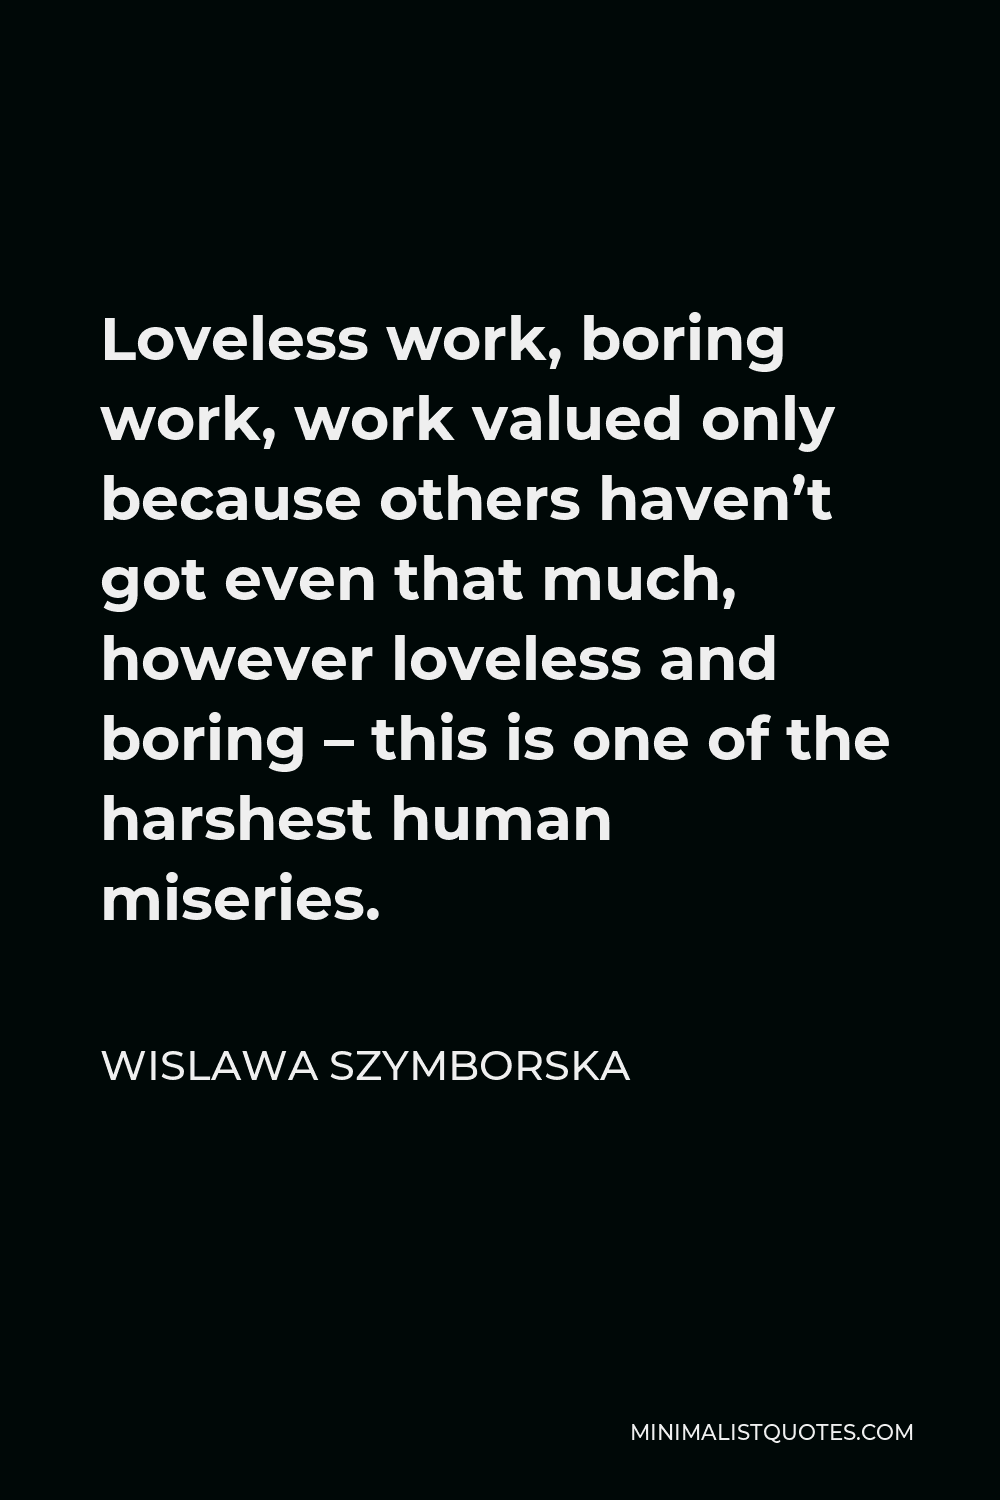 Wislawa Szymborska Quote - Loveless work, boring work, work valued only because others haven’t got even that much, however loveless and boring – this is one of the harshest human miseries.